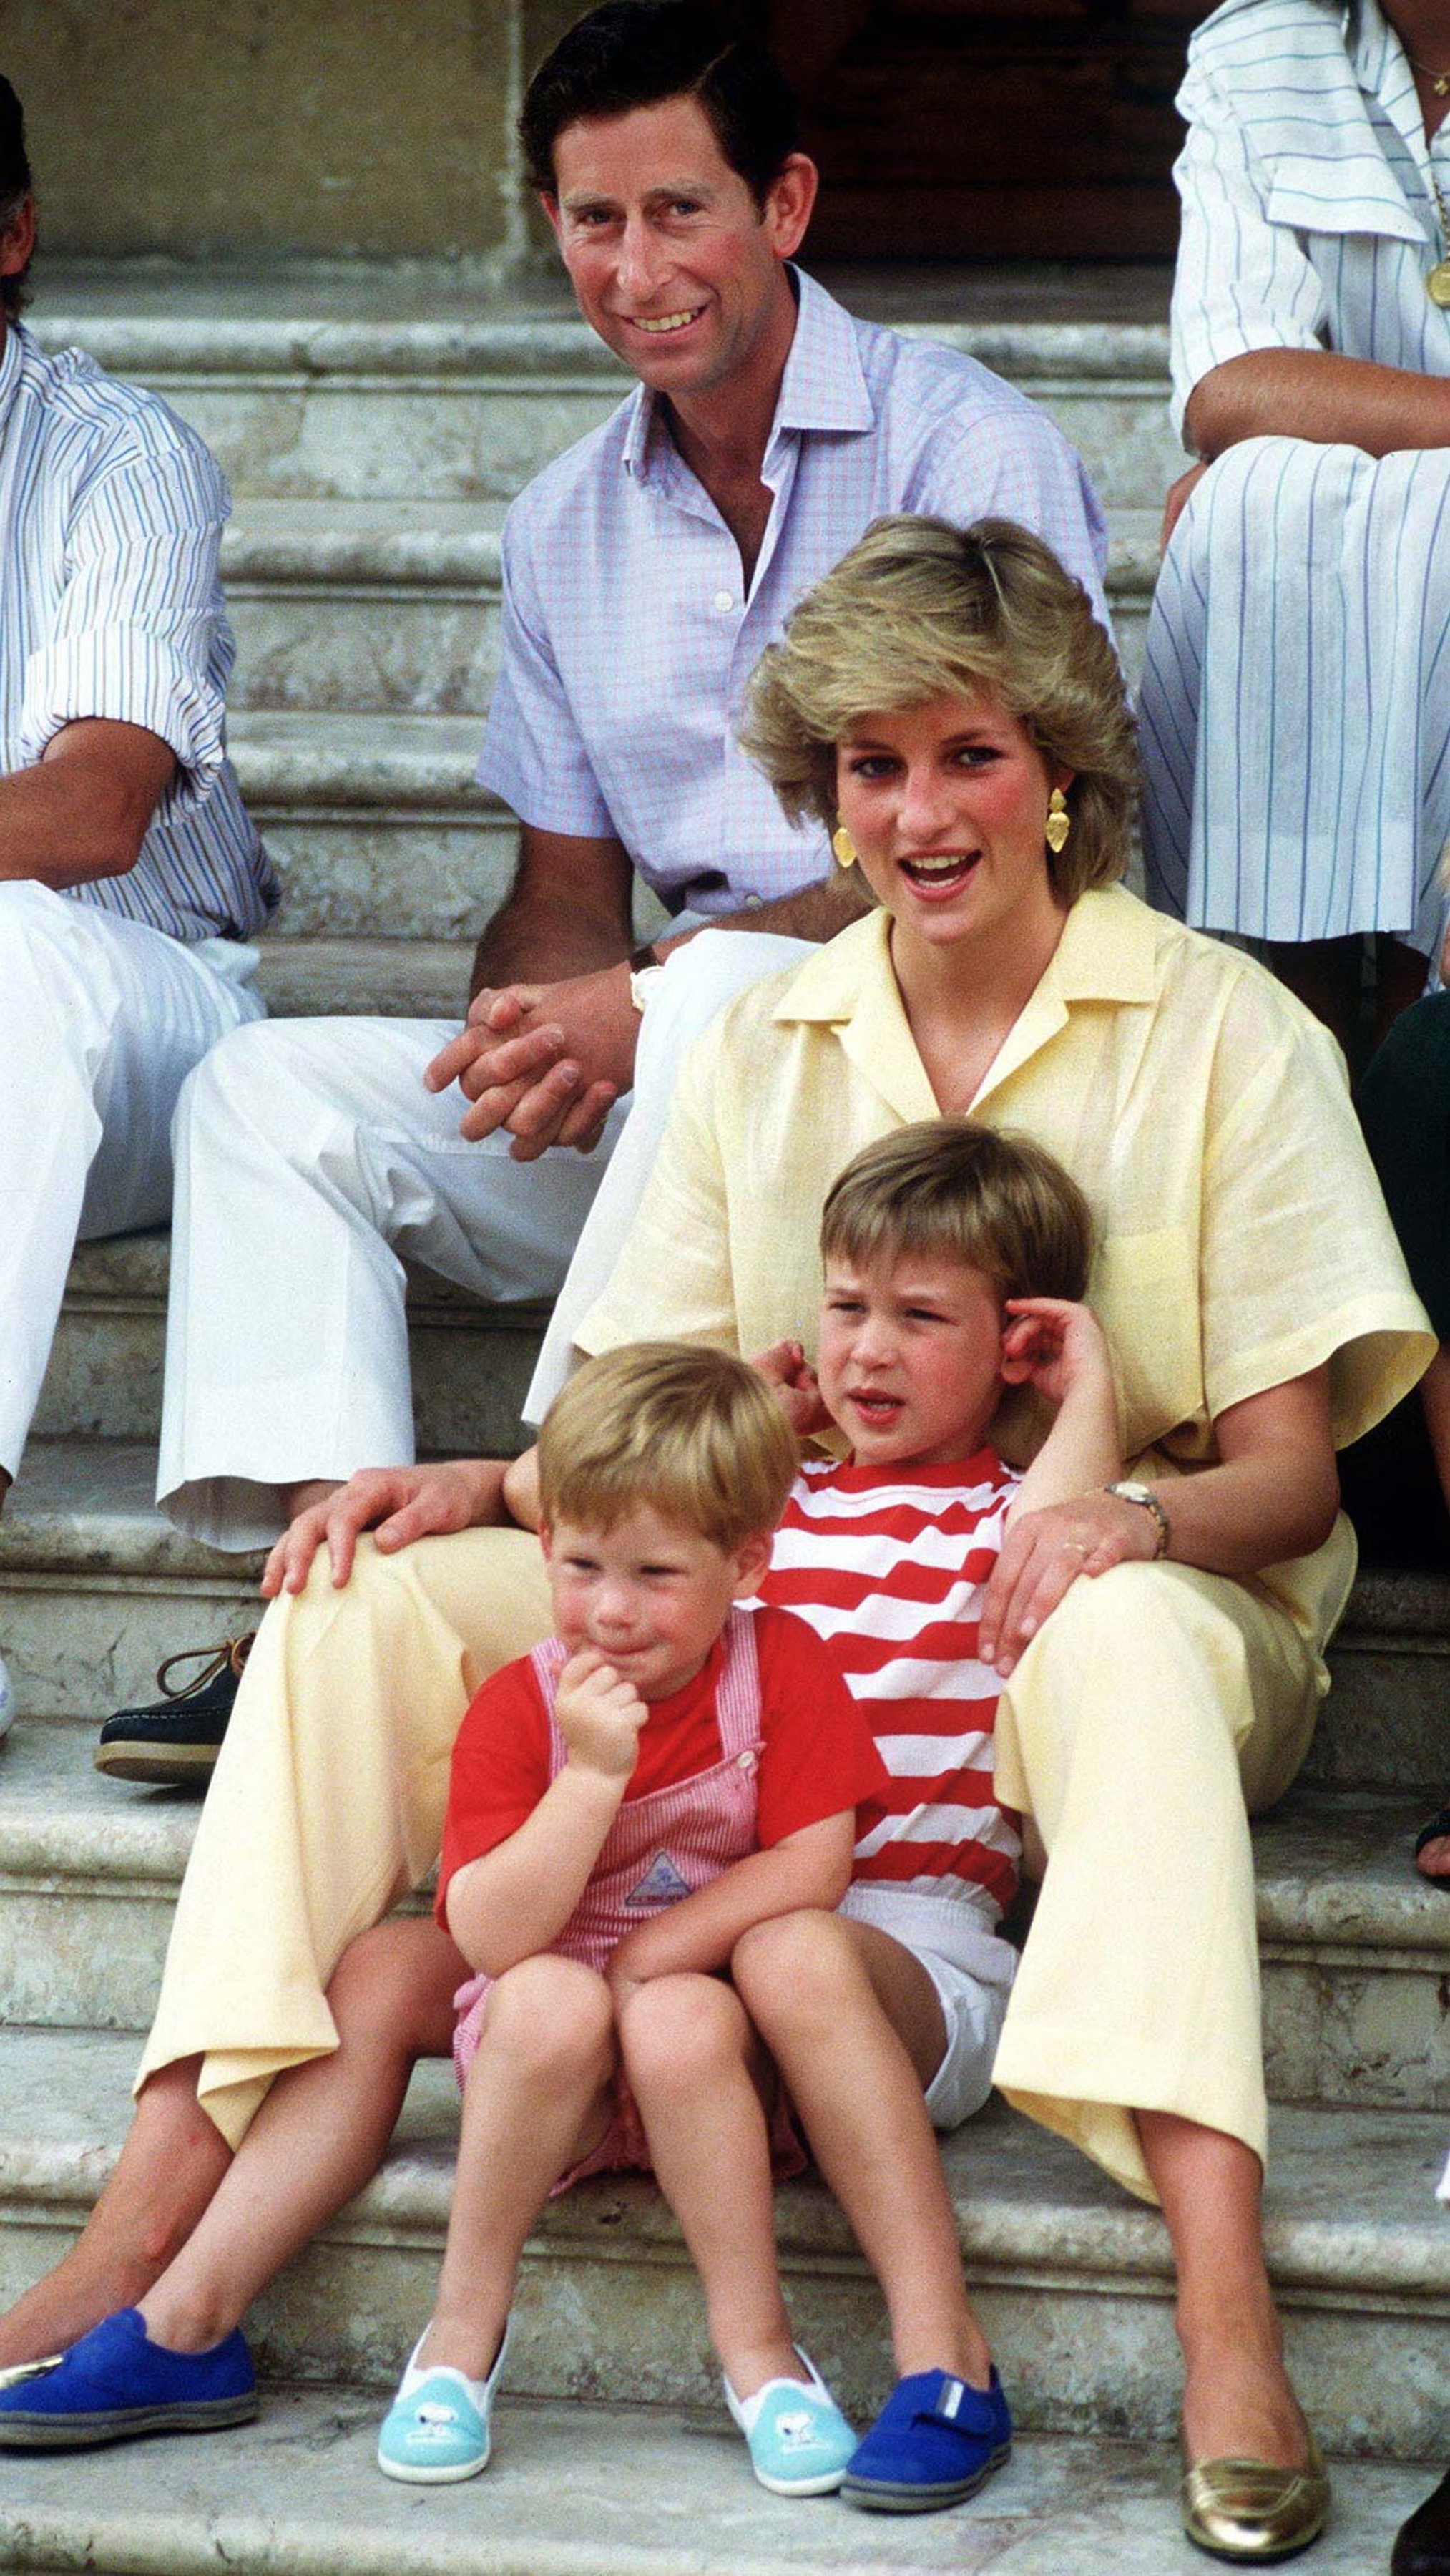 Princess Diana with Prince William and Harry on holiday in Spain in 1987. | Source: Getty Images